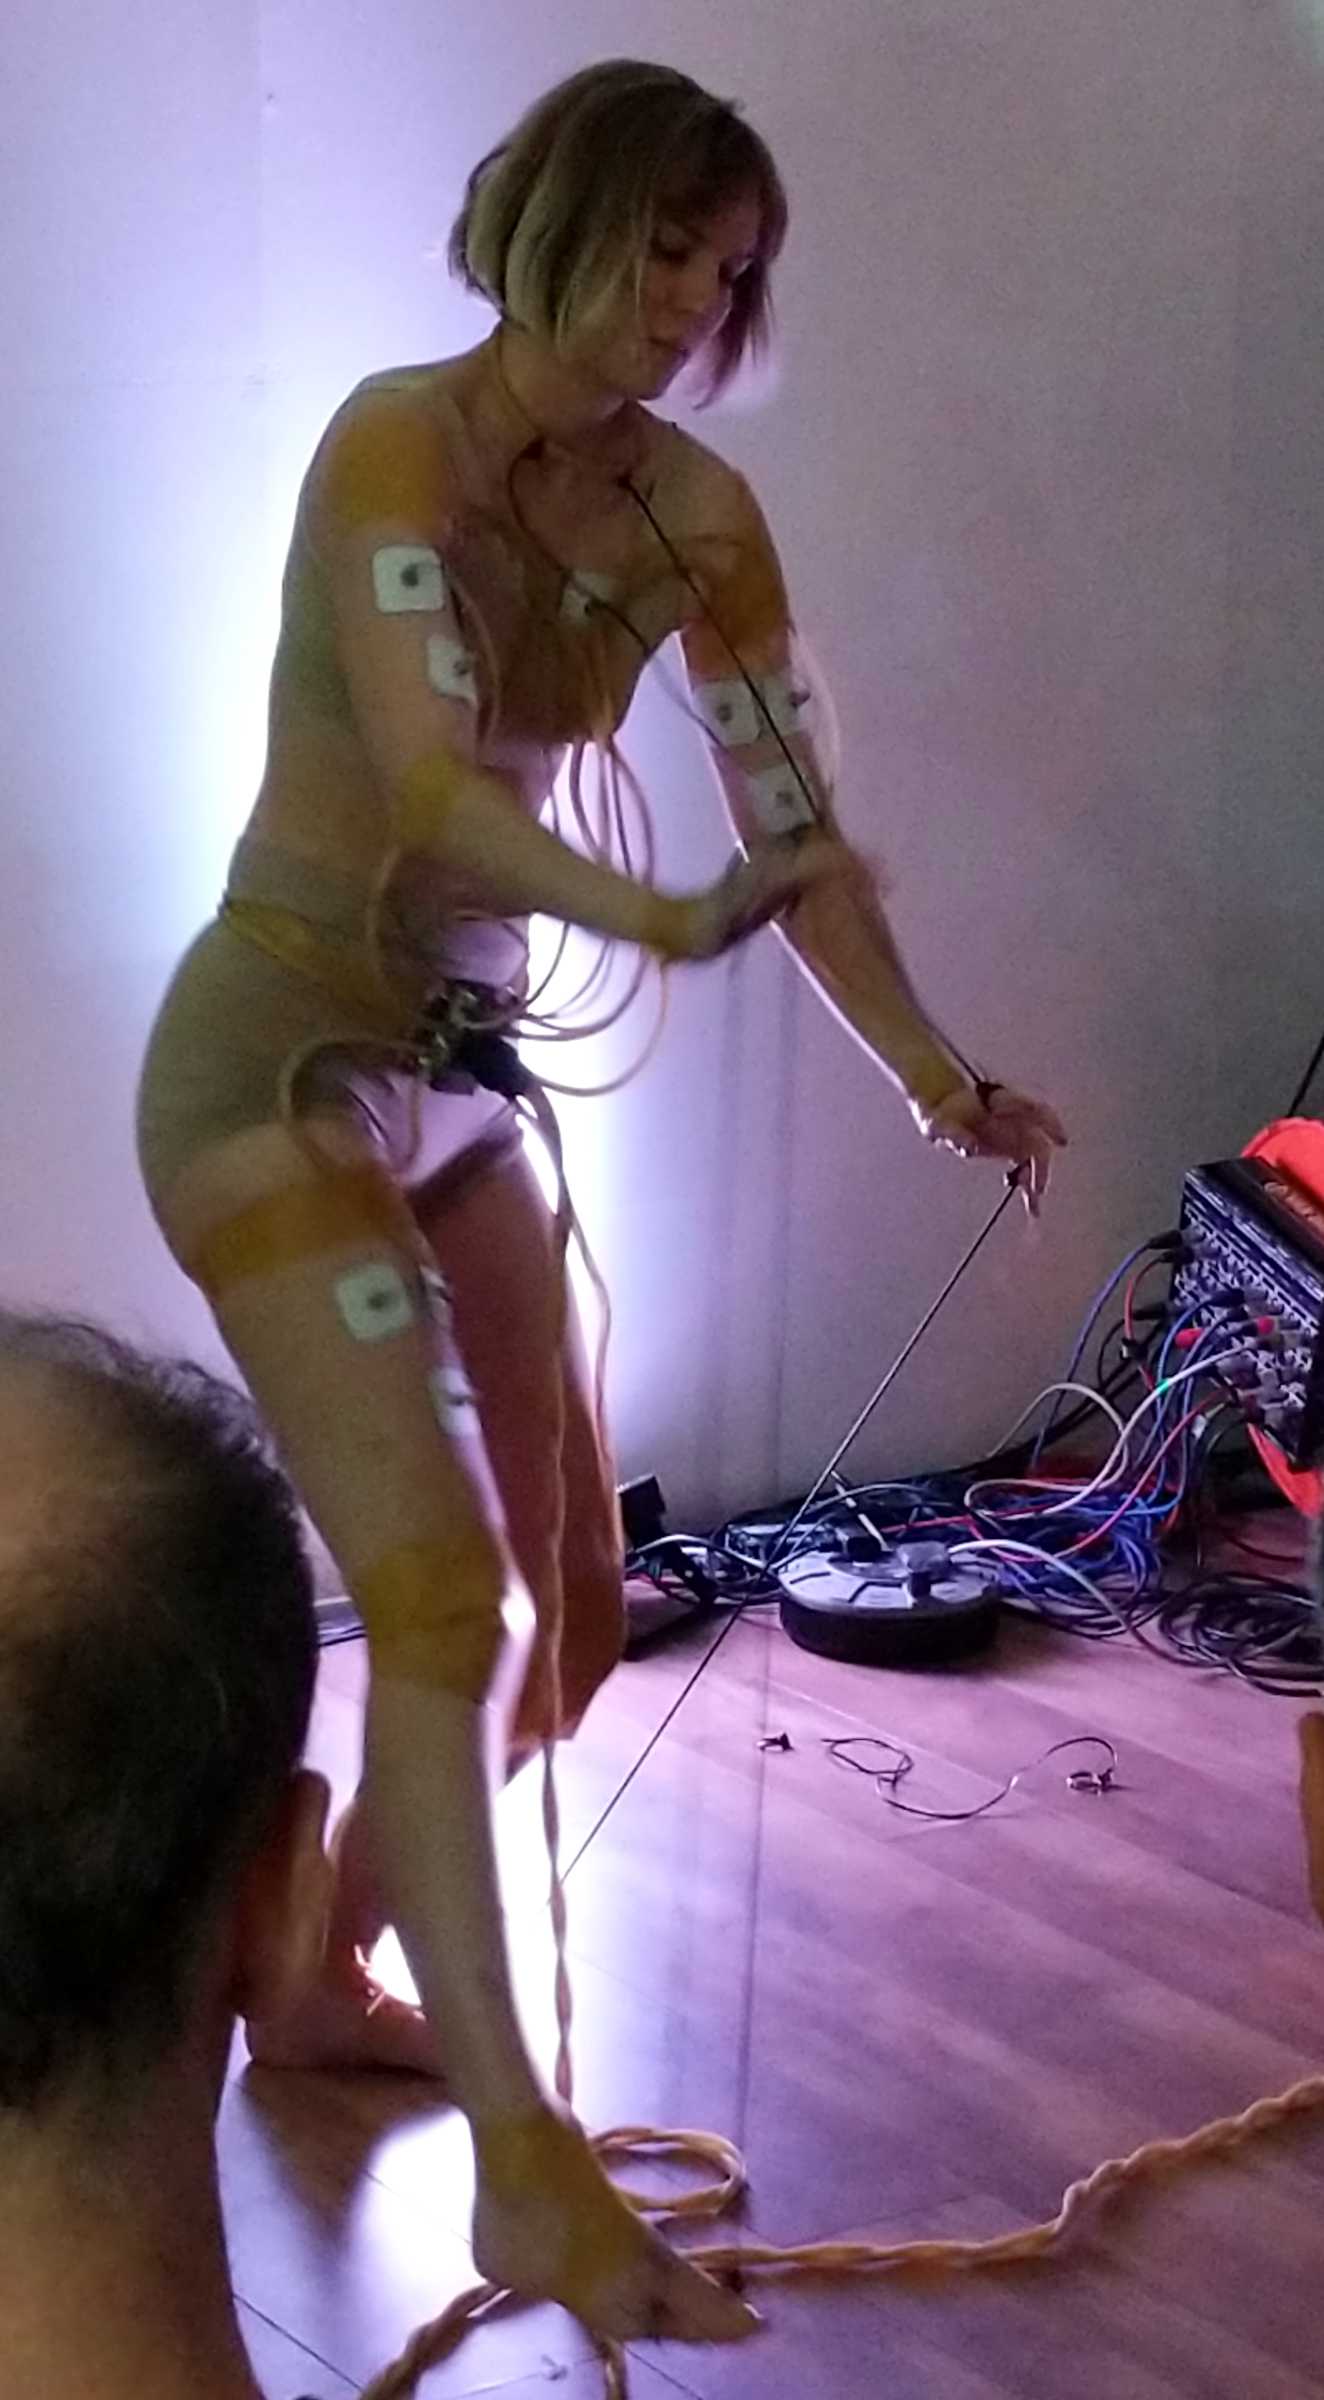 A woman with muscle sensors attached to her arms and legs, stretch sensors
from fingers to toes, and cables everywhere. She is moving as she uses the
sensors to control a musical performance.